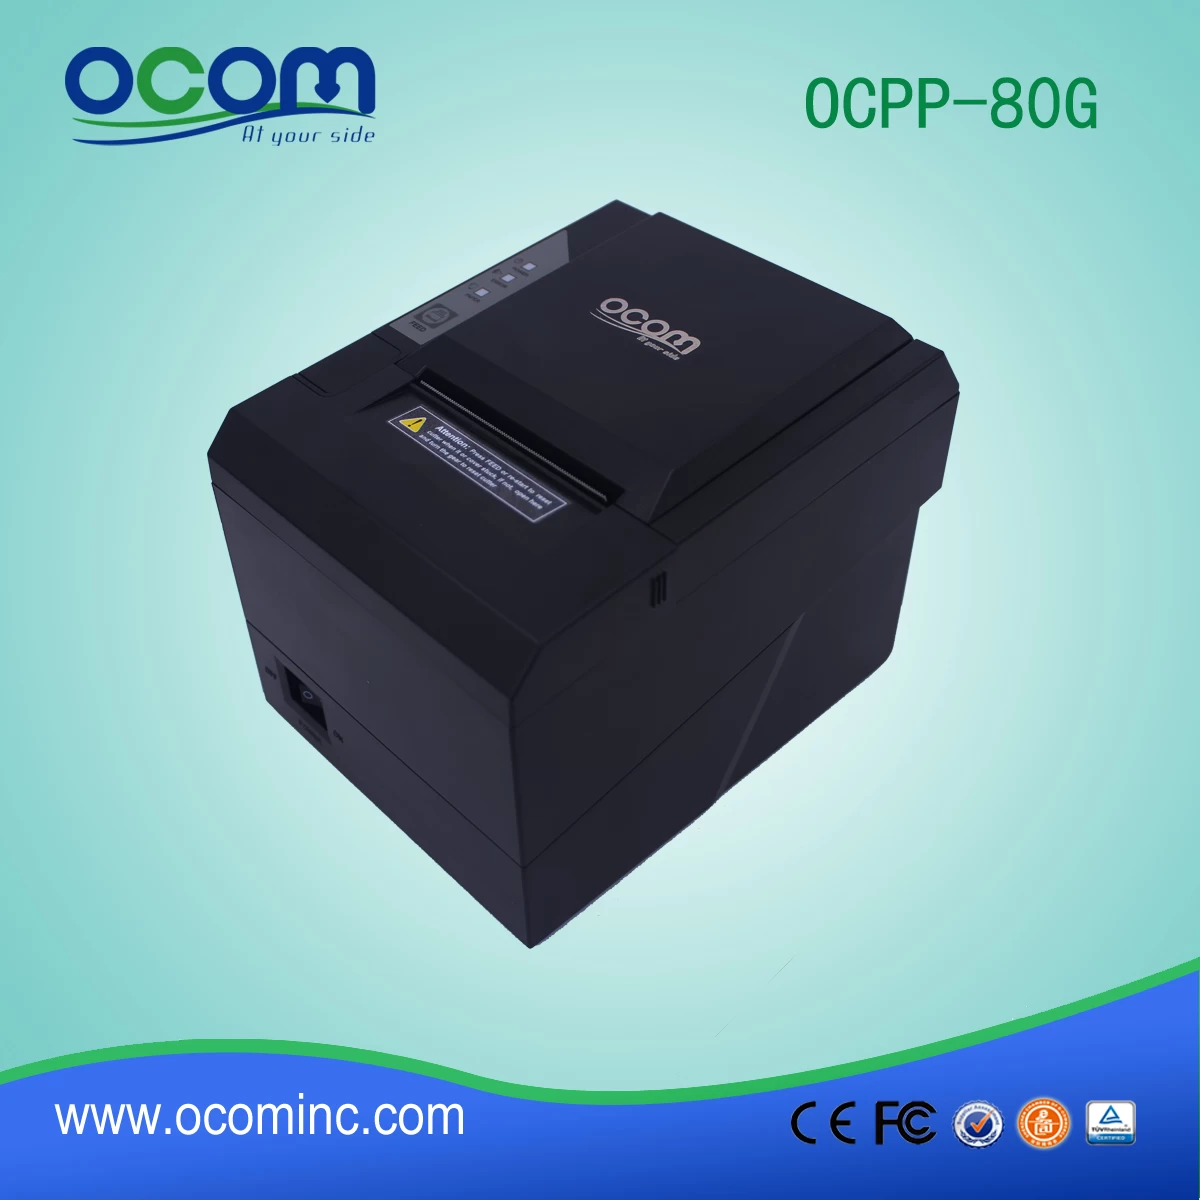 80mm POS receipt thermal printer with USB serial lan port and auto cutter (OCPP-80G)